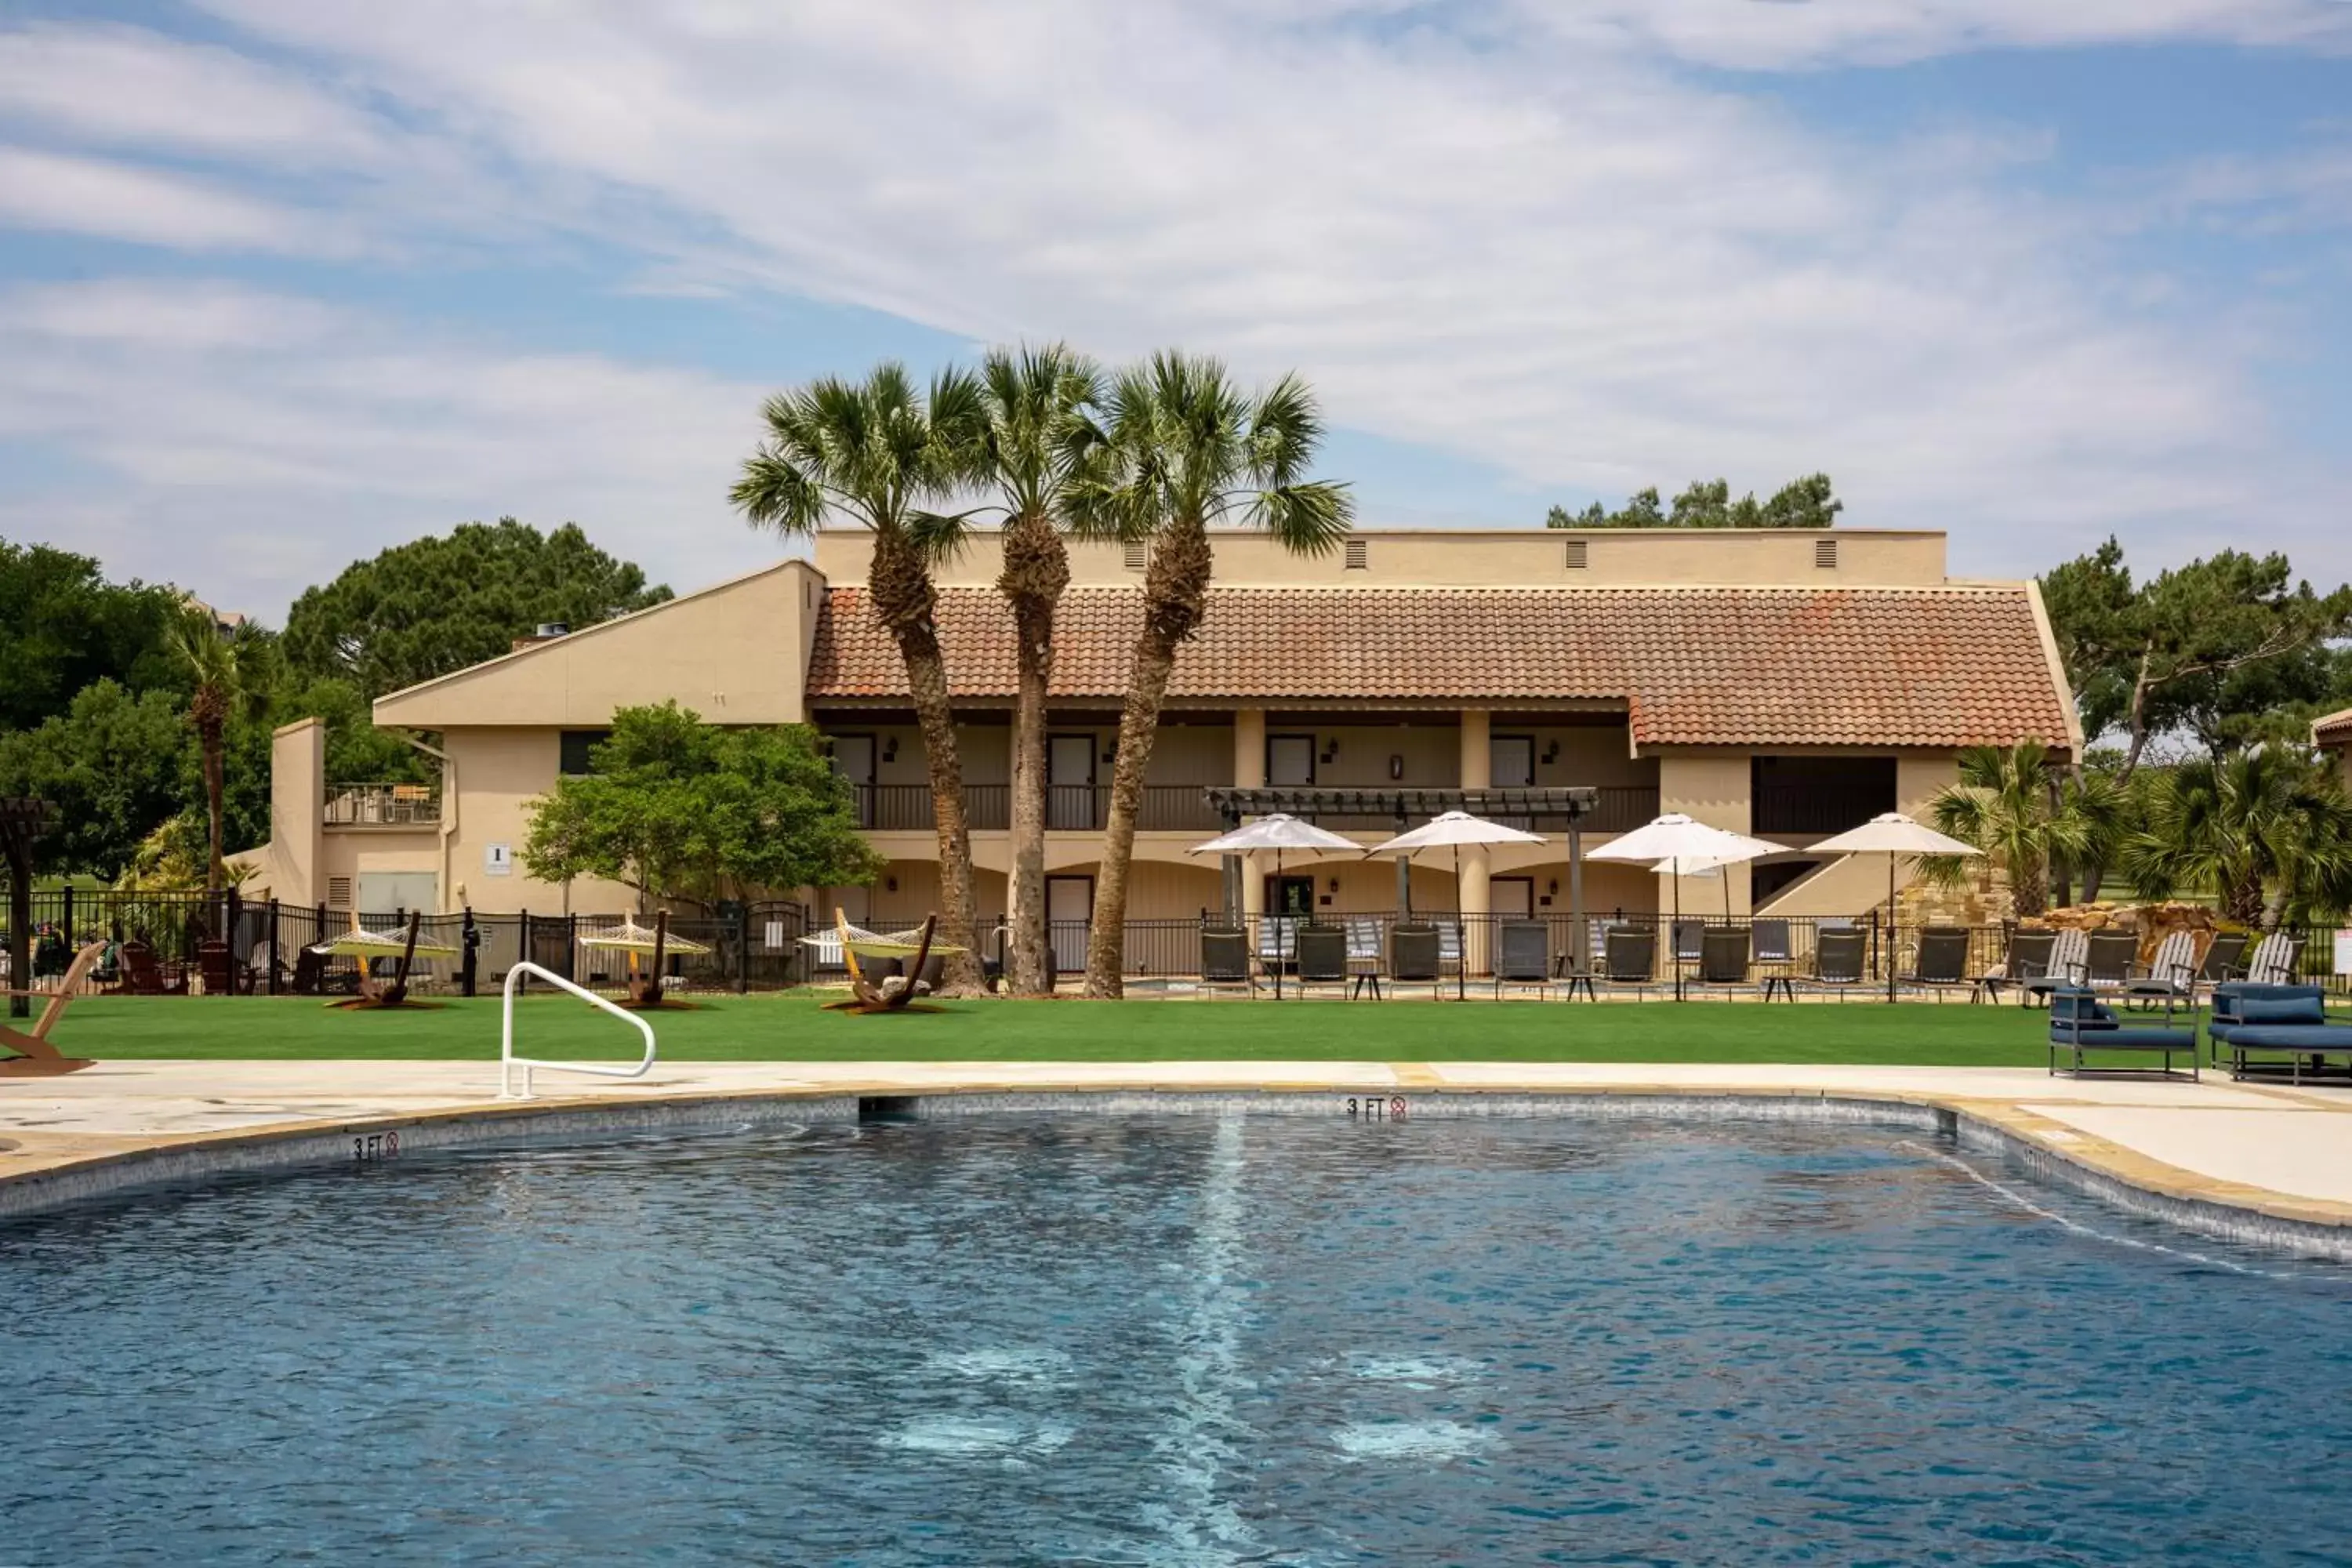 Swimming pool, Property Building in Tapatio Springs Hill Country Resort